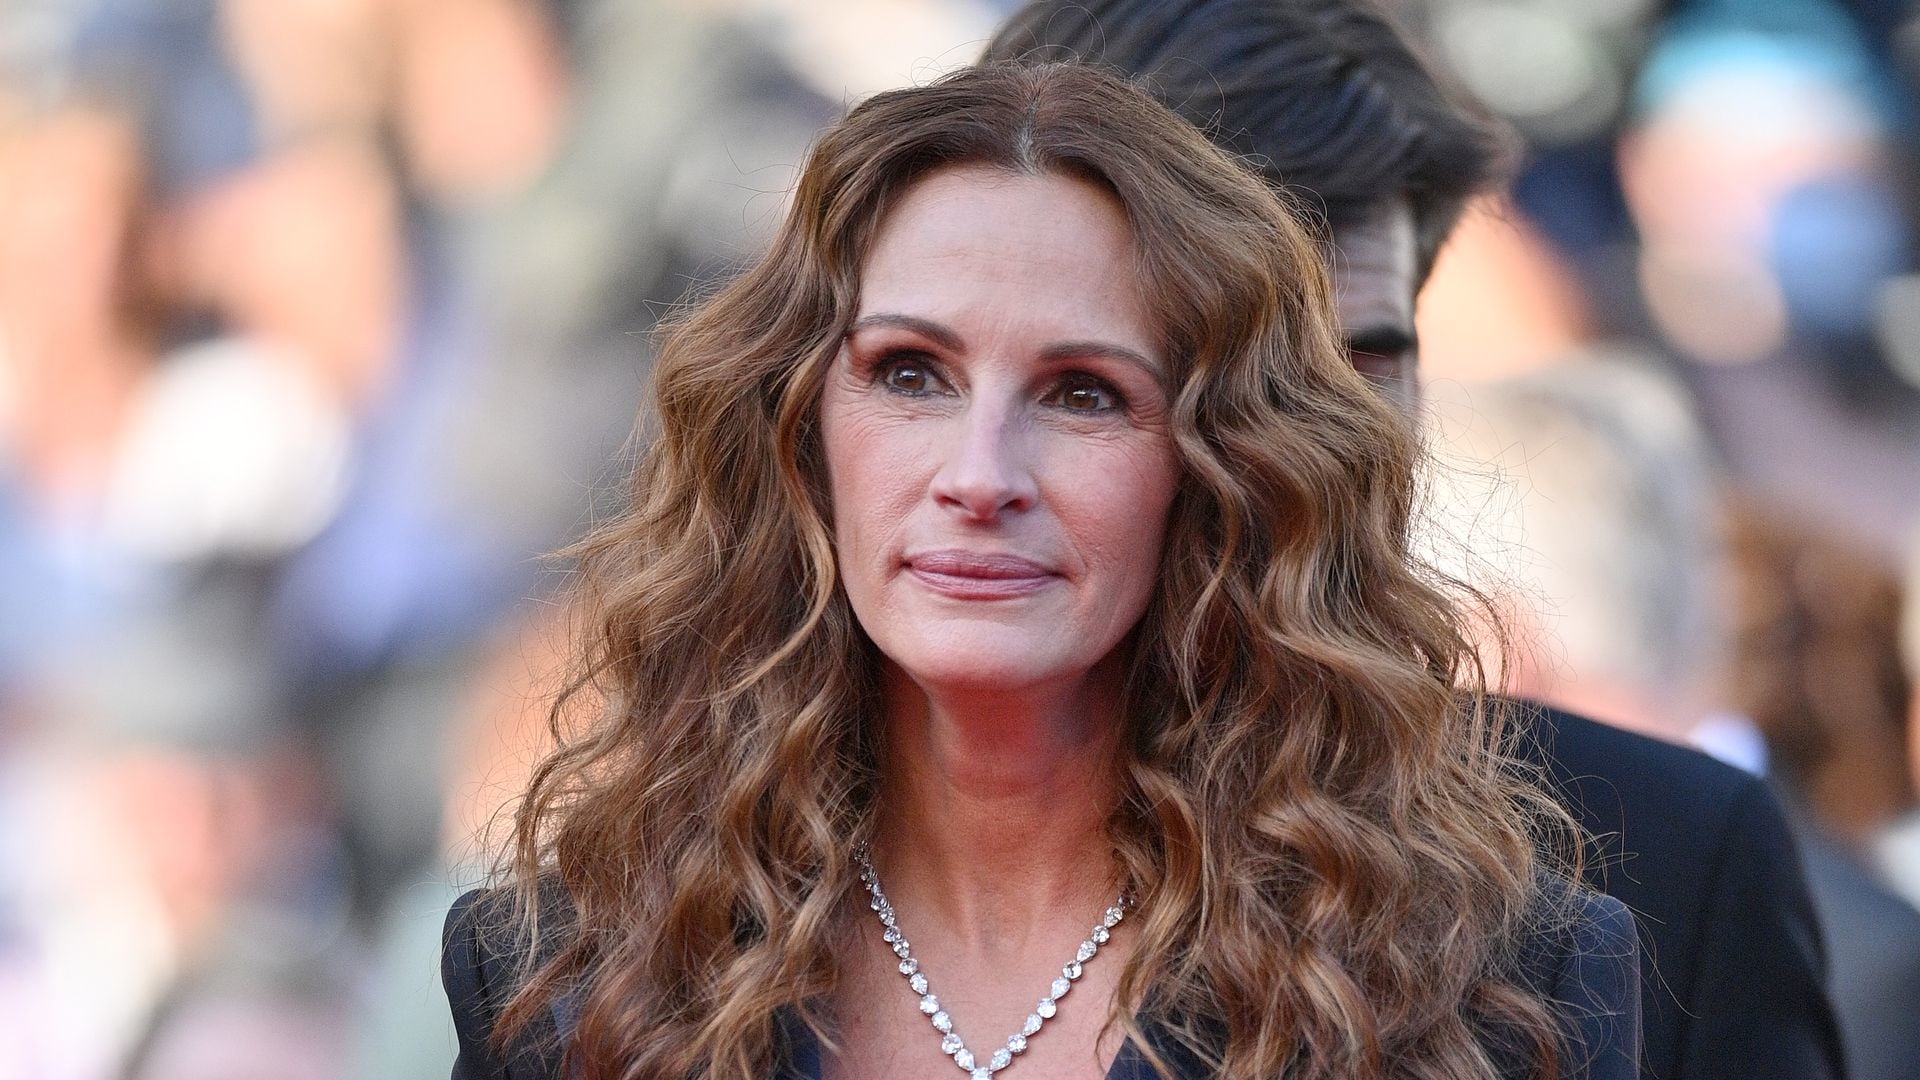 Julia Roberts attends the screening of "Armageddon Time" during the 75th annual Cannes Film Festival at Palais des Festivals on May 19, 2022 in Cannes, France